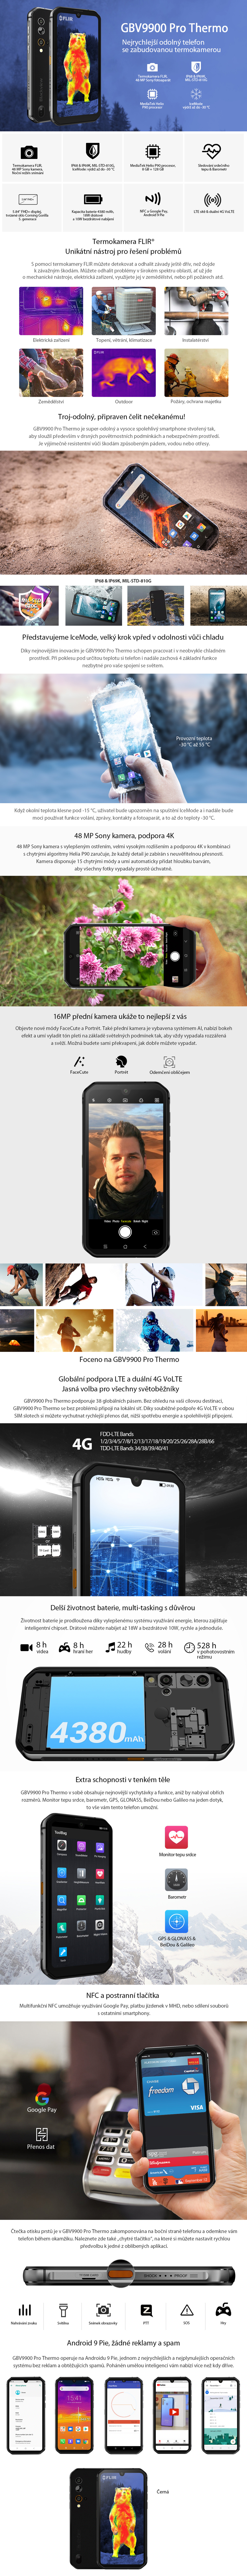 iGET BLACKVIEW GBV9900 Pro Thermo